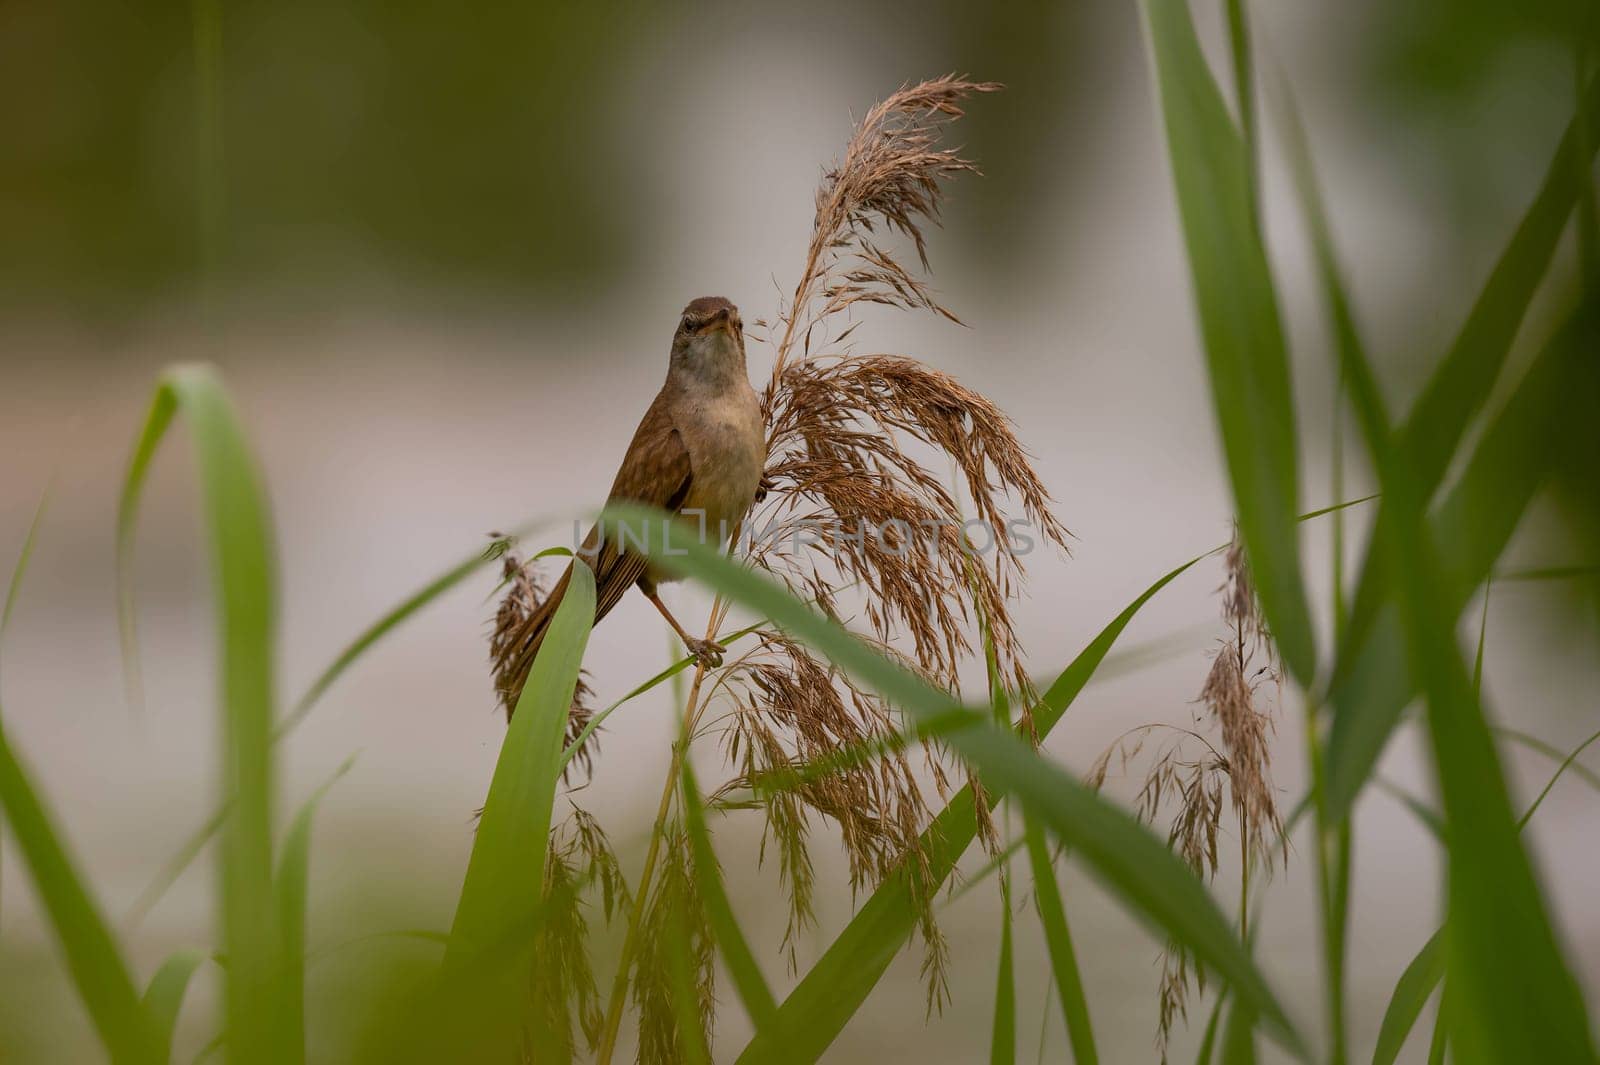 A Great Reed Warbler perched on a sturdy spigot, observing its surroundings with a keen eye. Its melodious song fills the air.